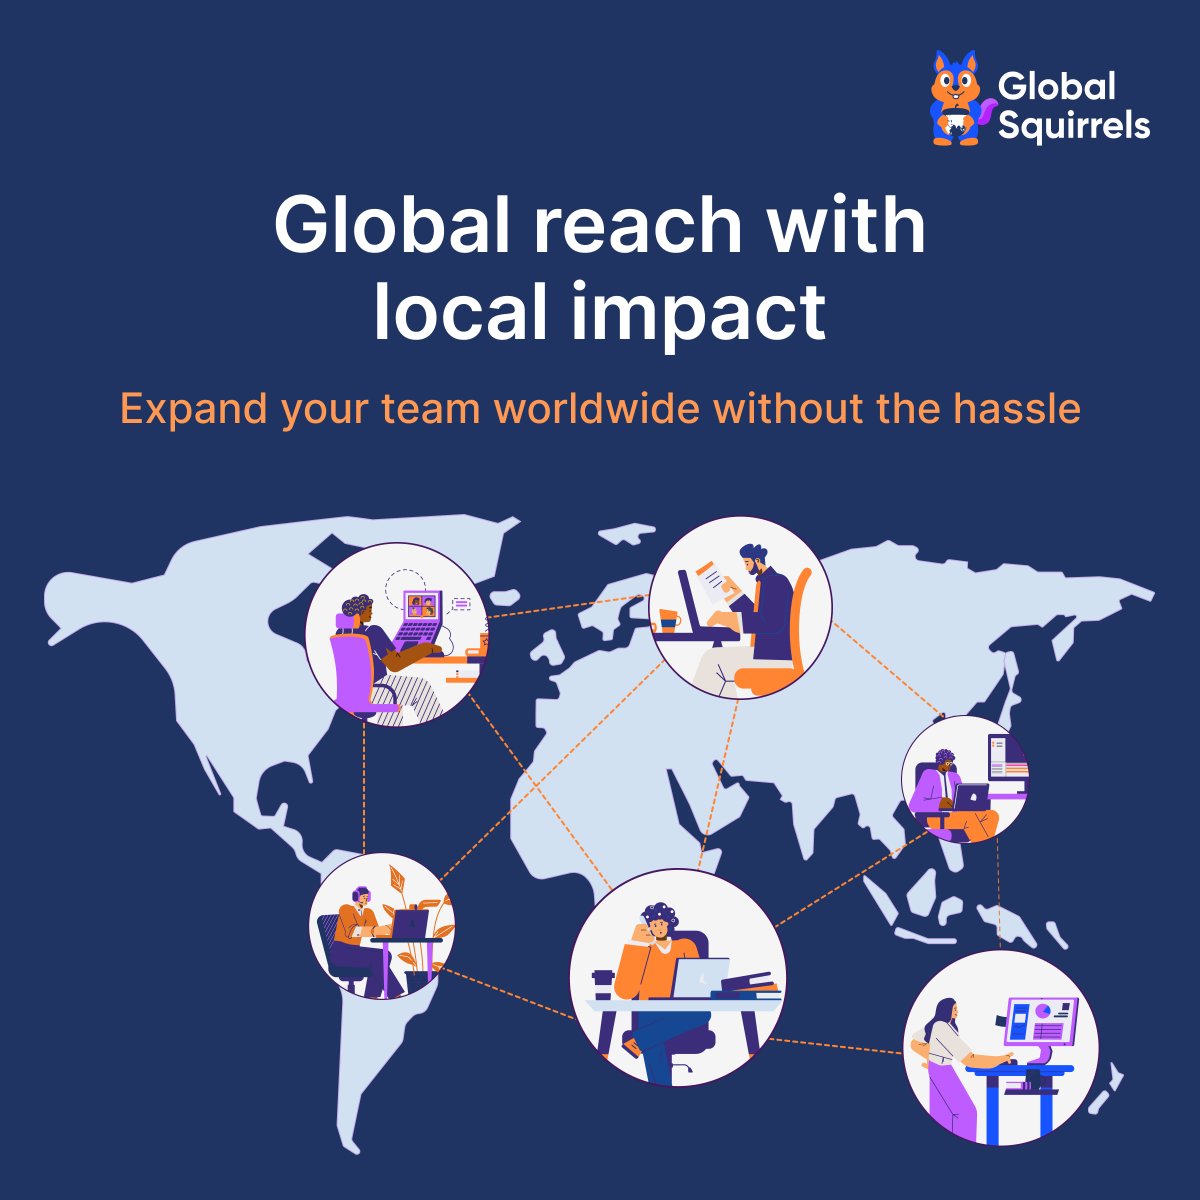 Expand your business reach without sacrificing local insights.
Our payrolling solutions enable you to hire locally across the globe, ensuring compliance and reducing administrative burdens.
Connect with us to learn how we can help your business grow globally